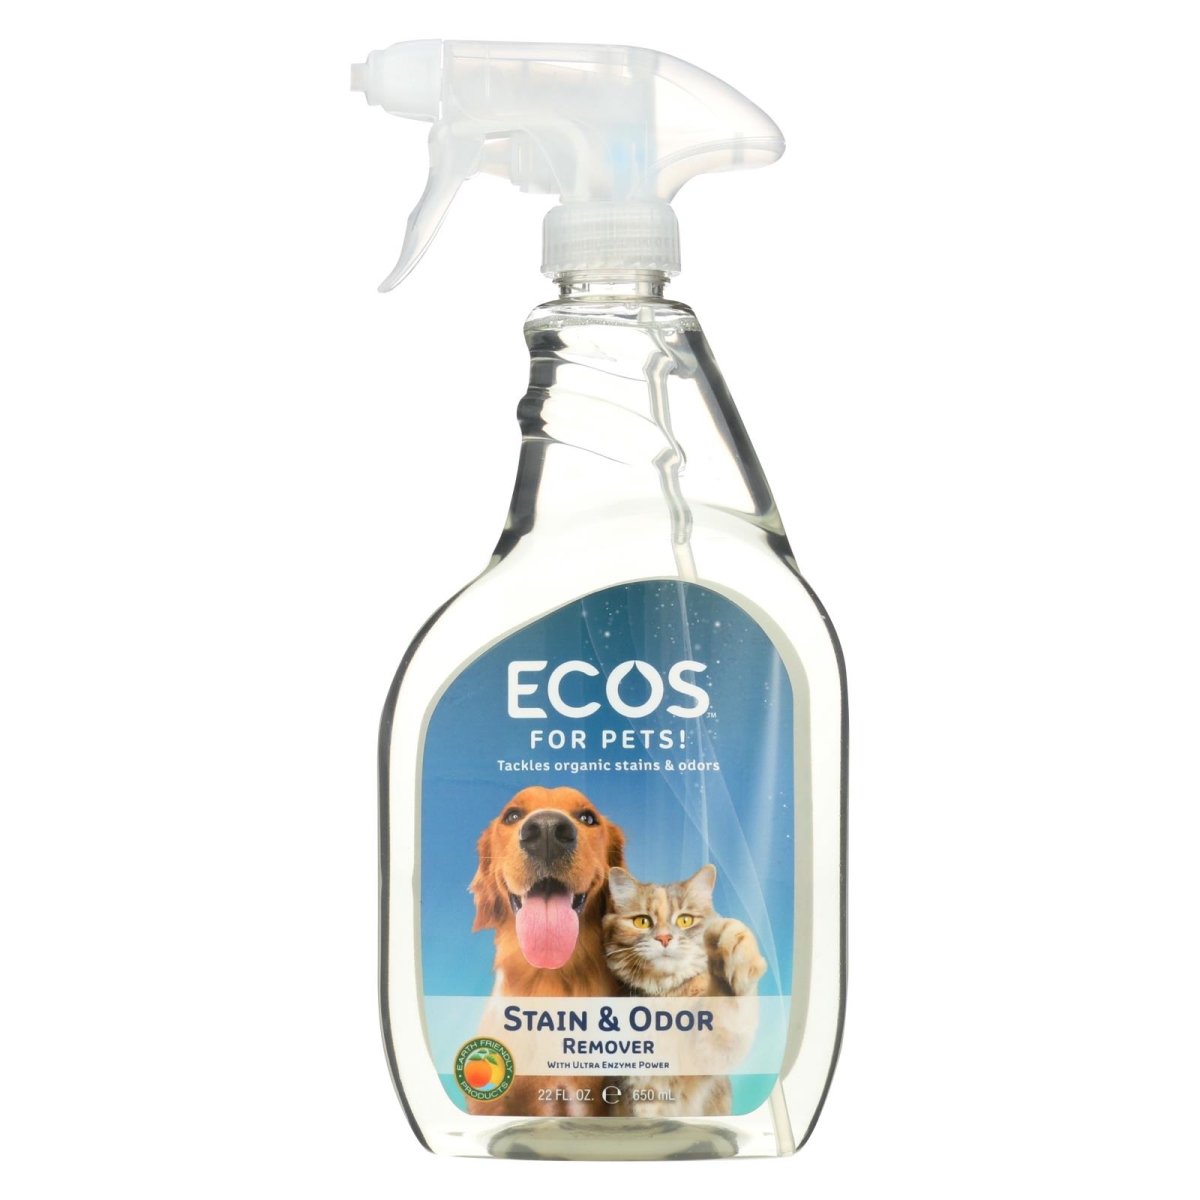 Picture of Ecos for Pets HG1427913 22 oz Stain & Odor Remover for Pet - Case of 6